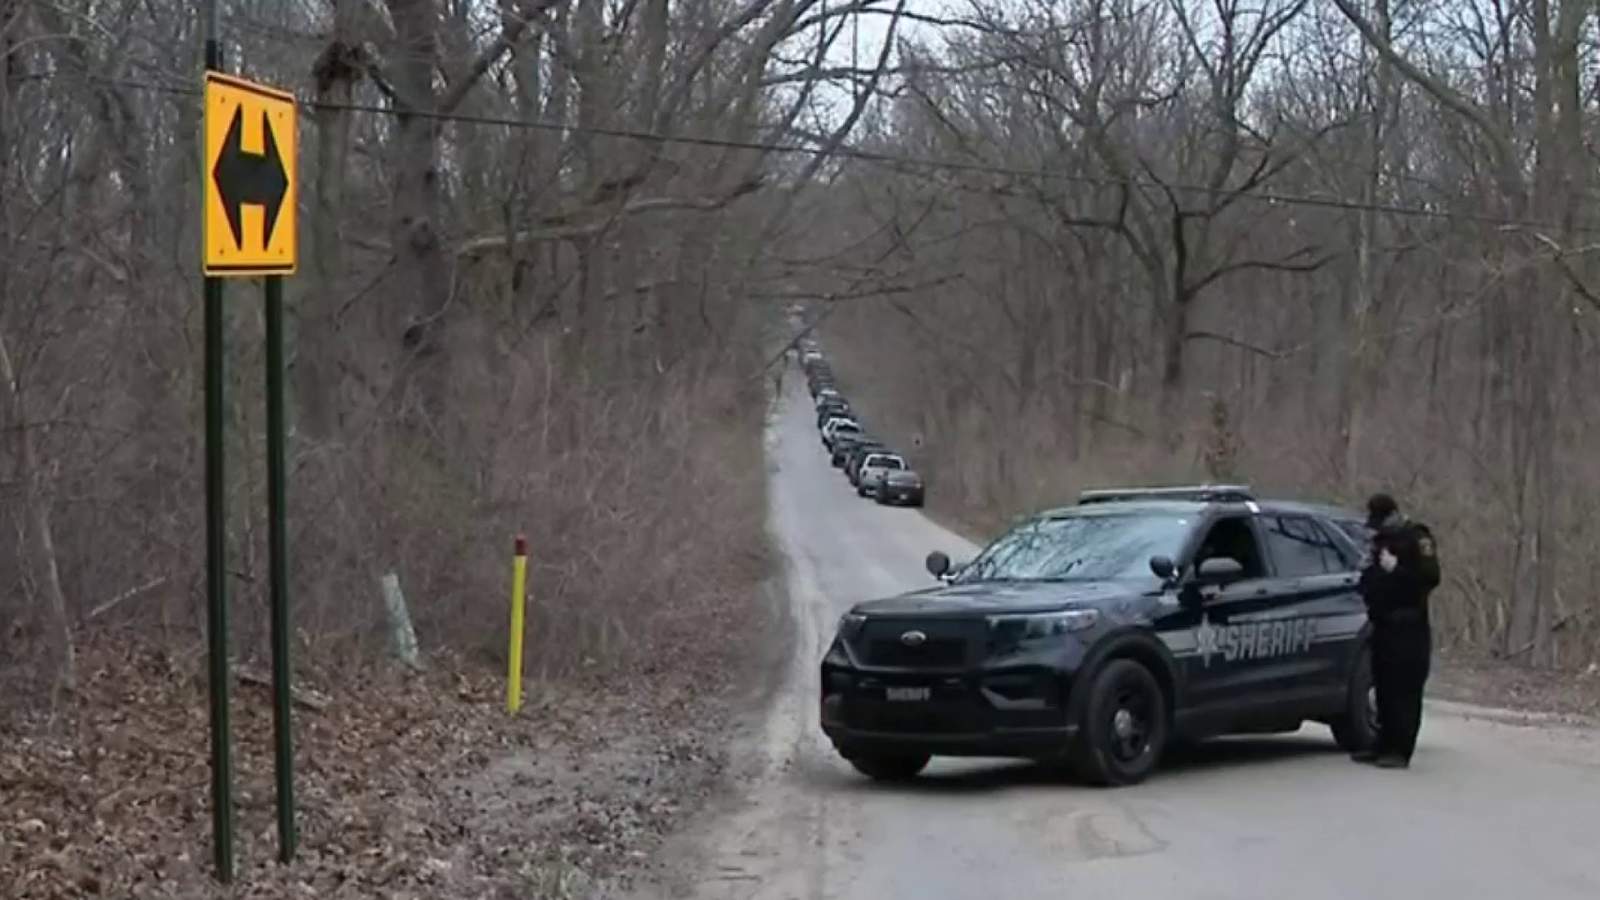 Superior Township residents asked to shelter inside amid ongoing barricaded gunman situation near Meadow Drive, Gale Road